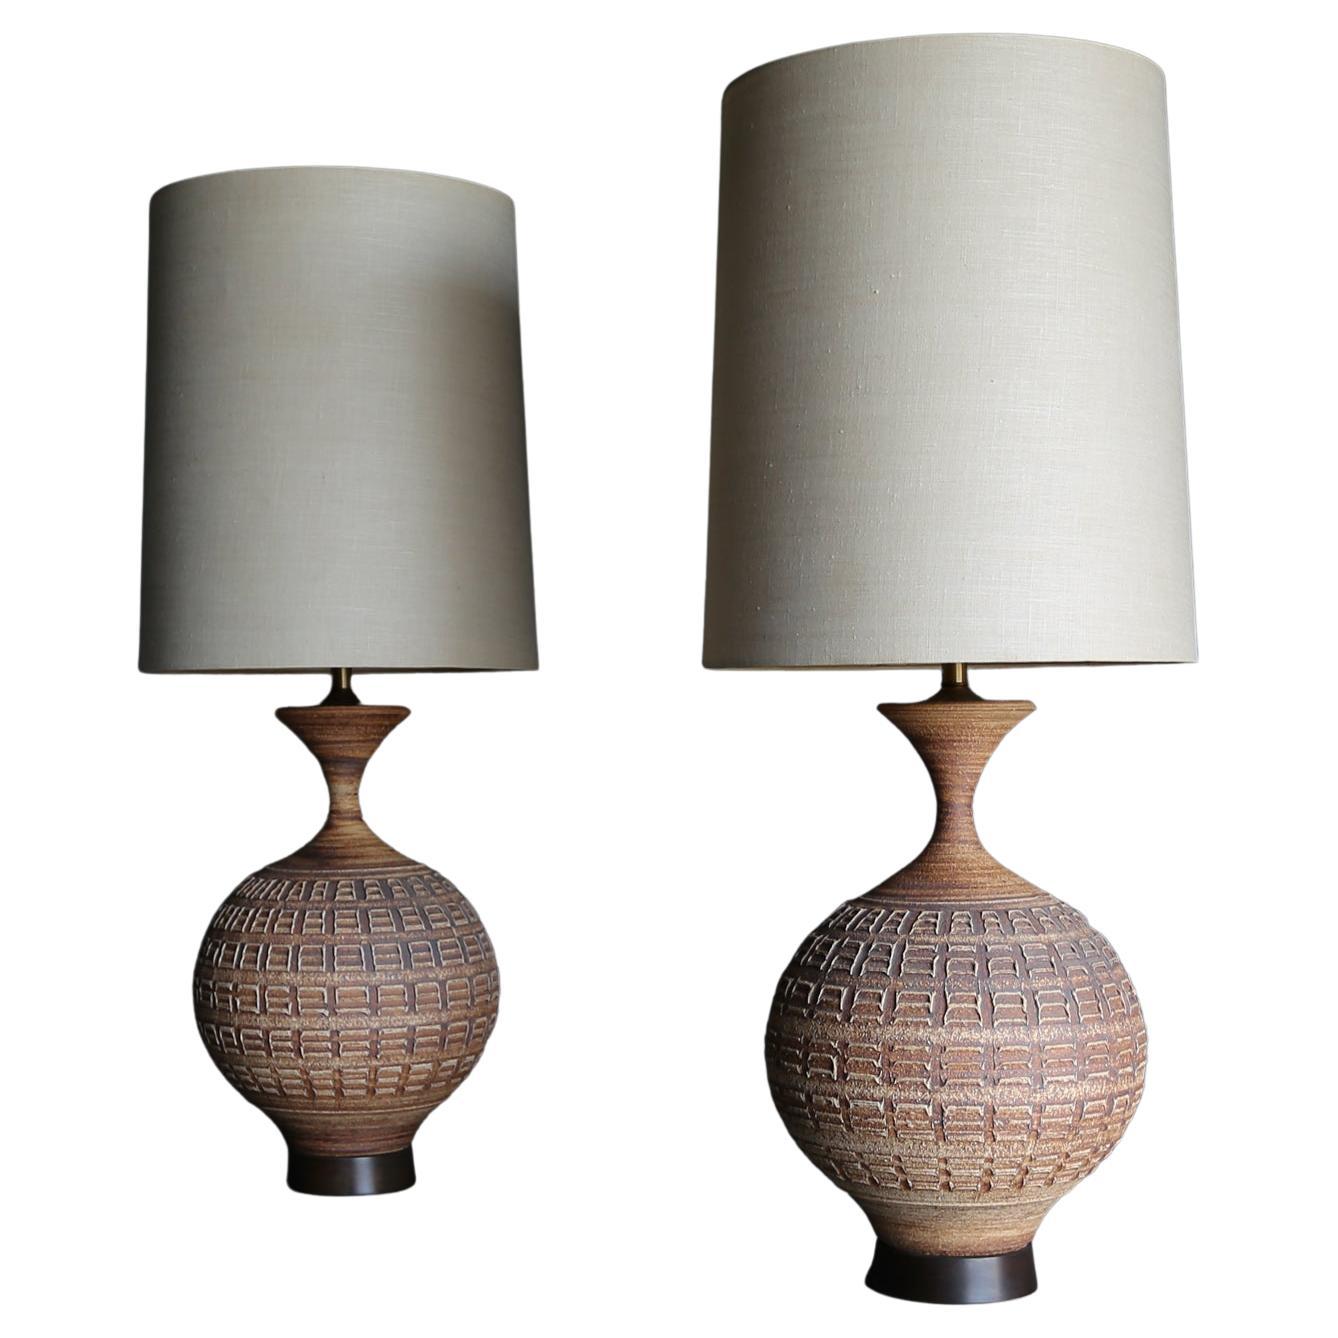 Bob Kinzie Large Scale "O Series" Ceramic Table Lamps, circa 1965 For Sale